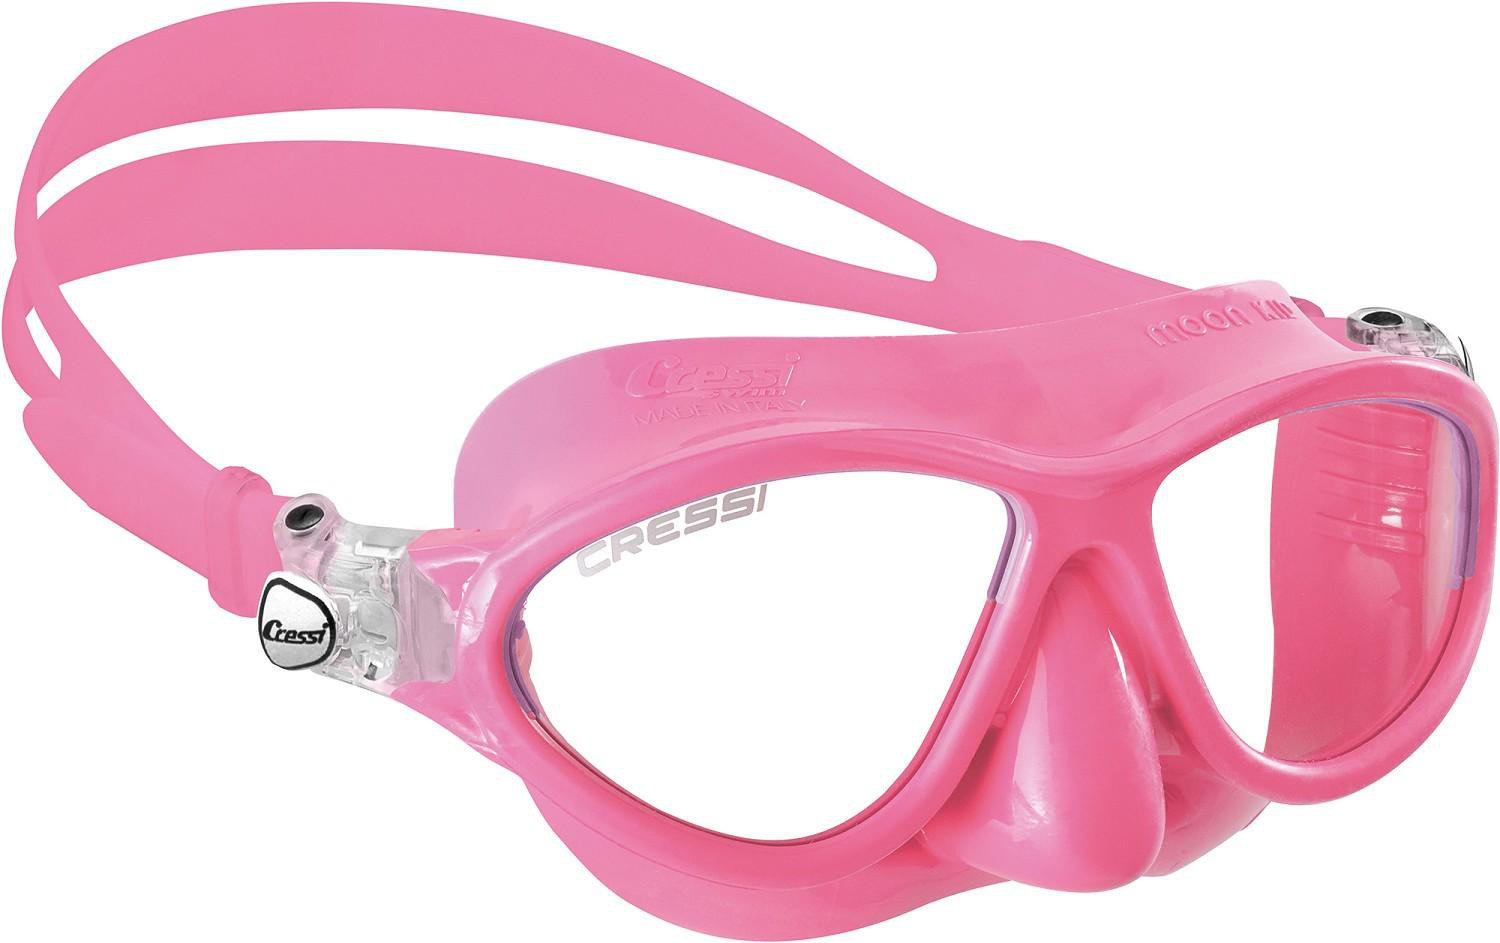 Diving Mask Cressi Moon Pink/Lilac